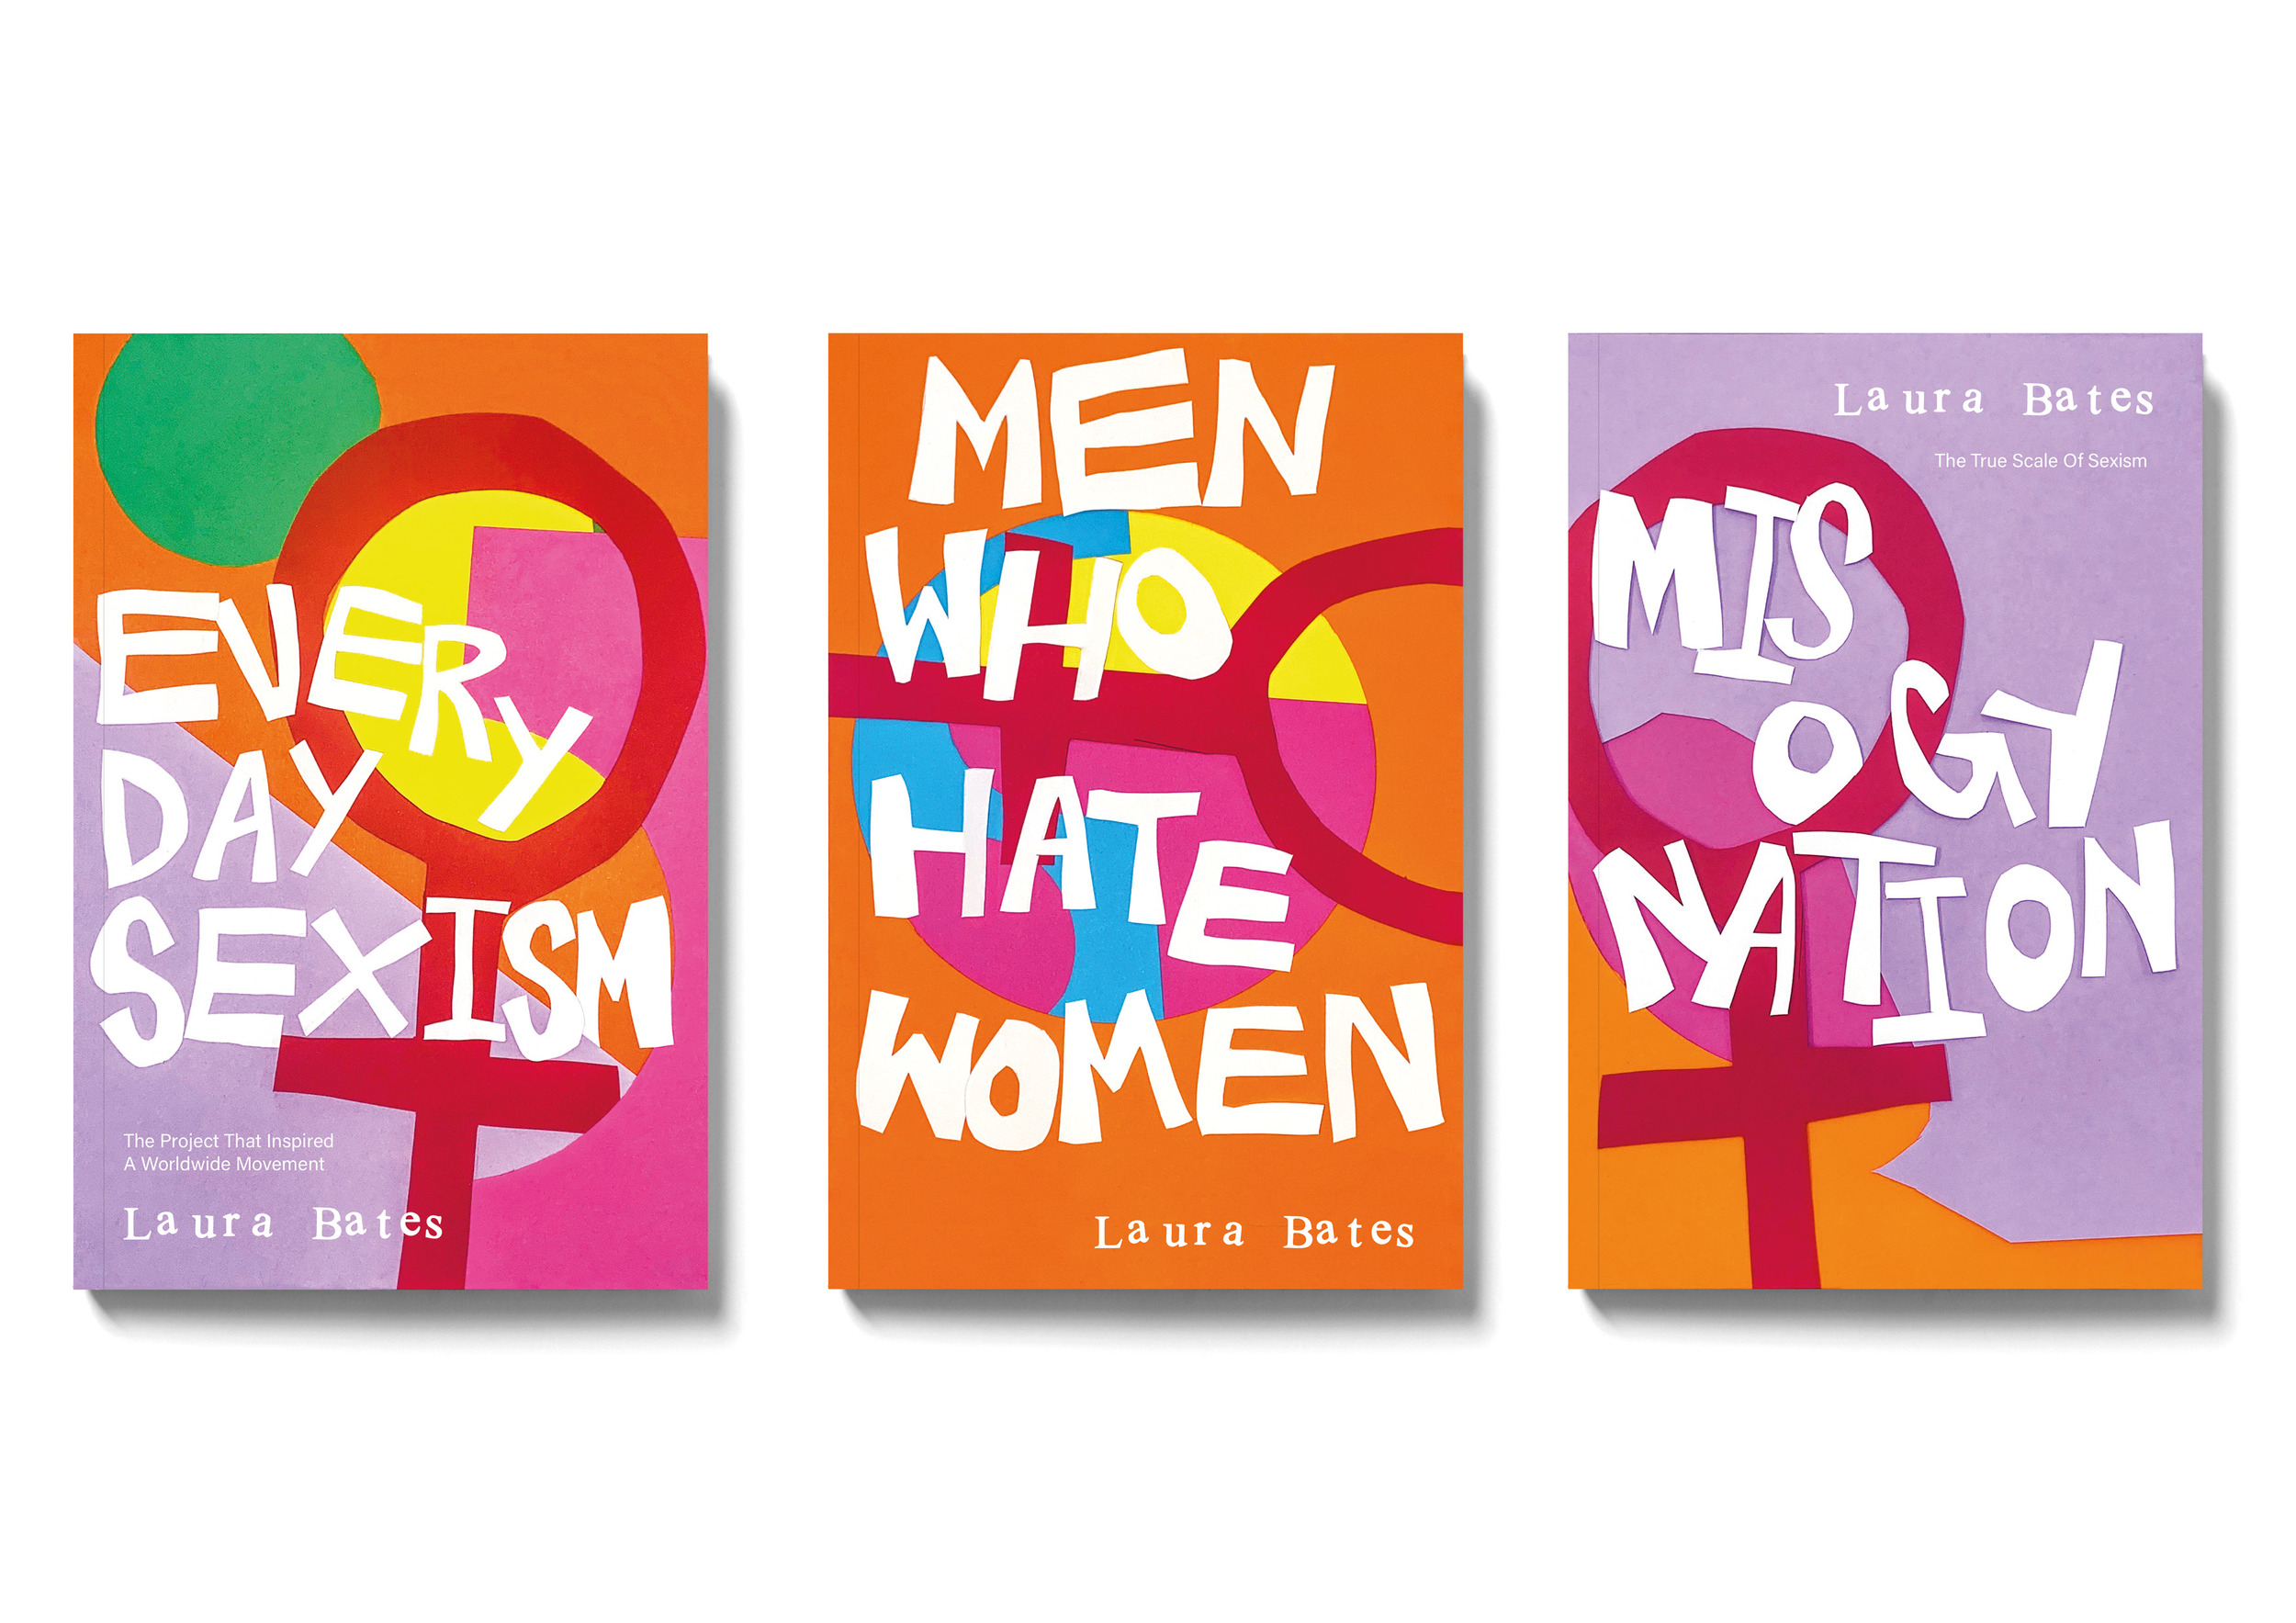 Book cover design by Harriett Smith using colourful hand-cut collages.